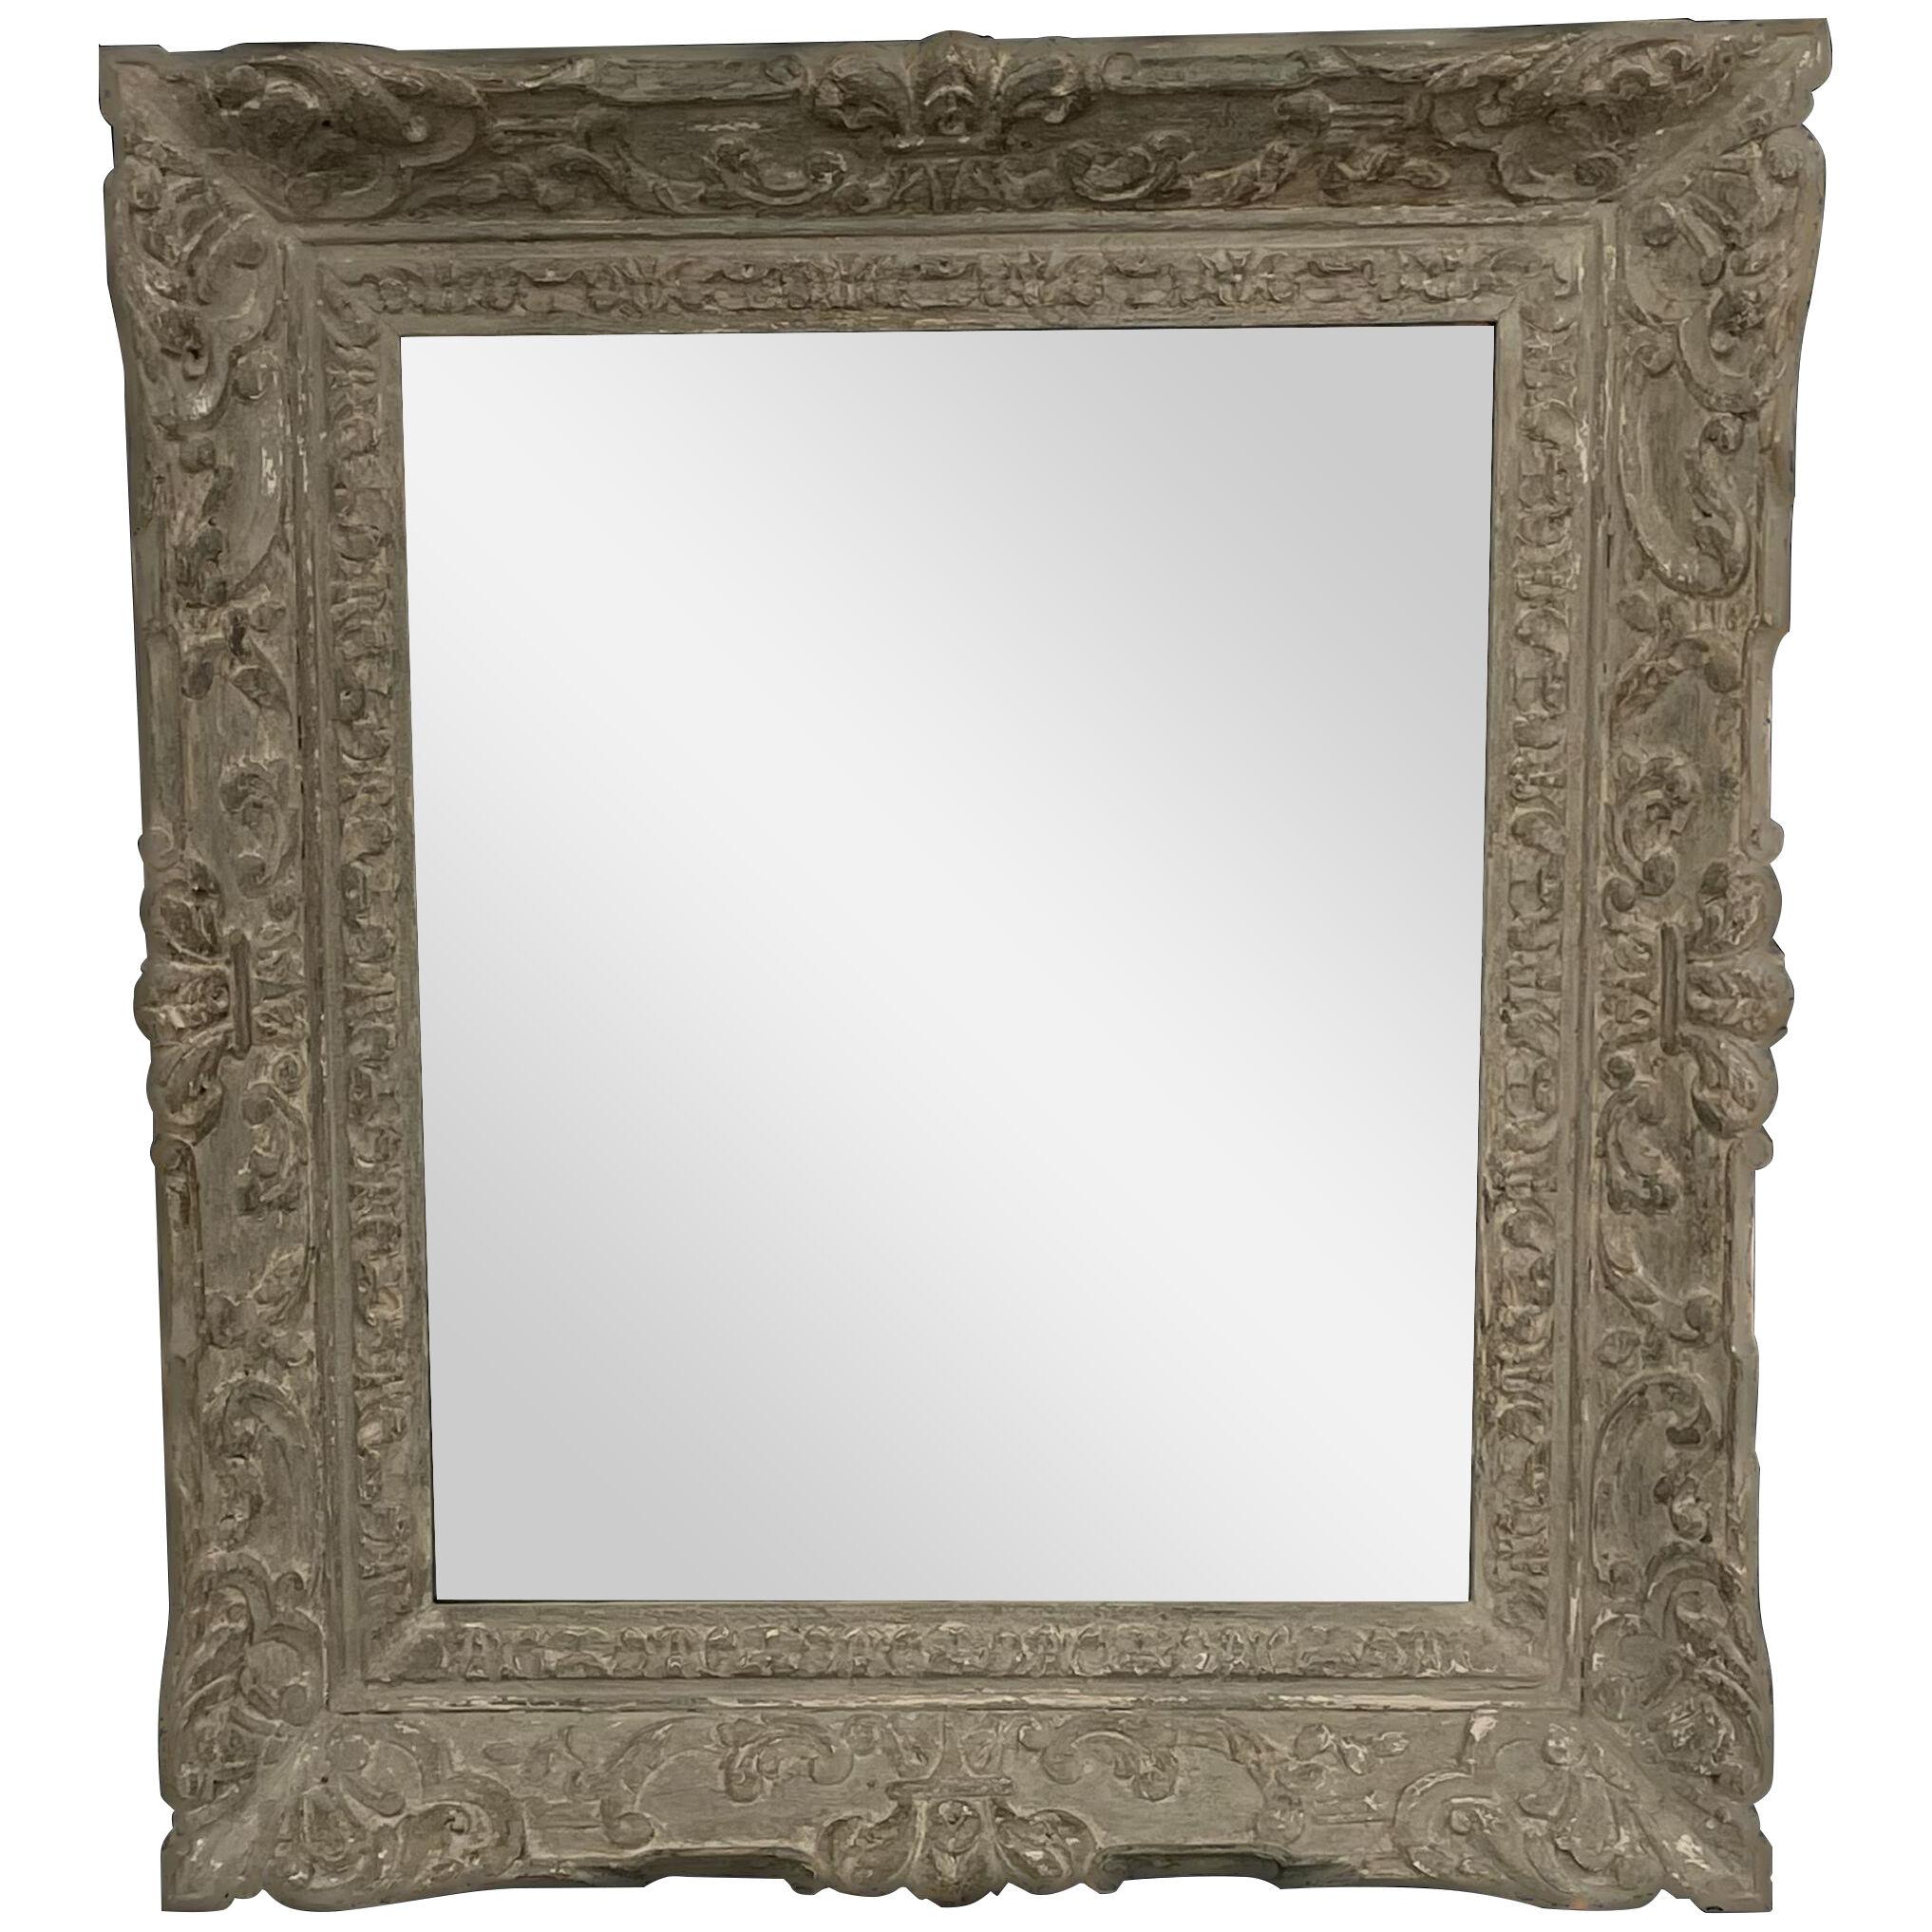 Early Gustavian Wall Mirror, Diminutive, Carved